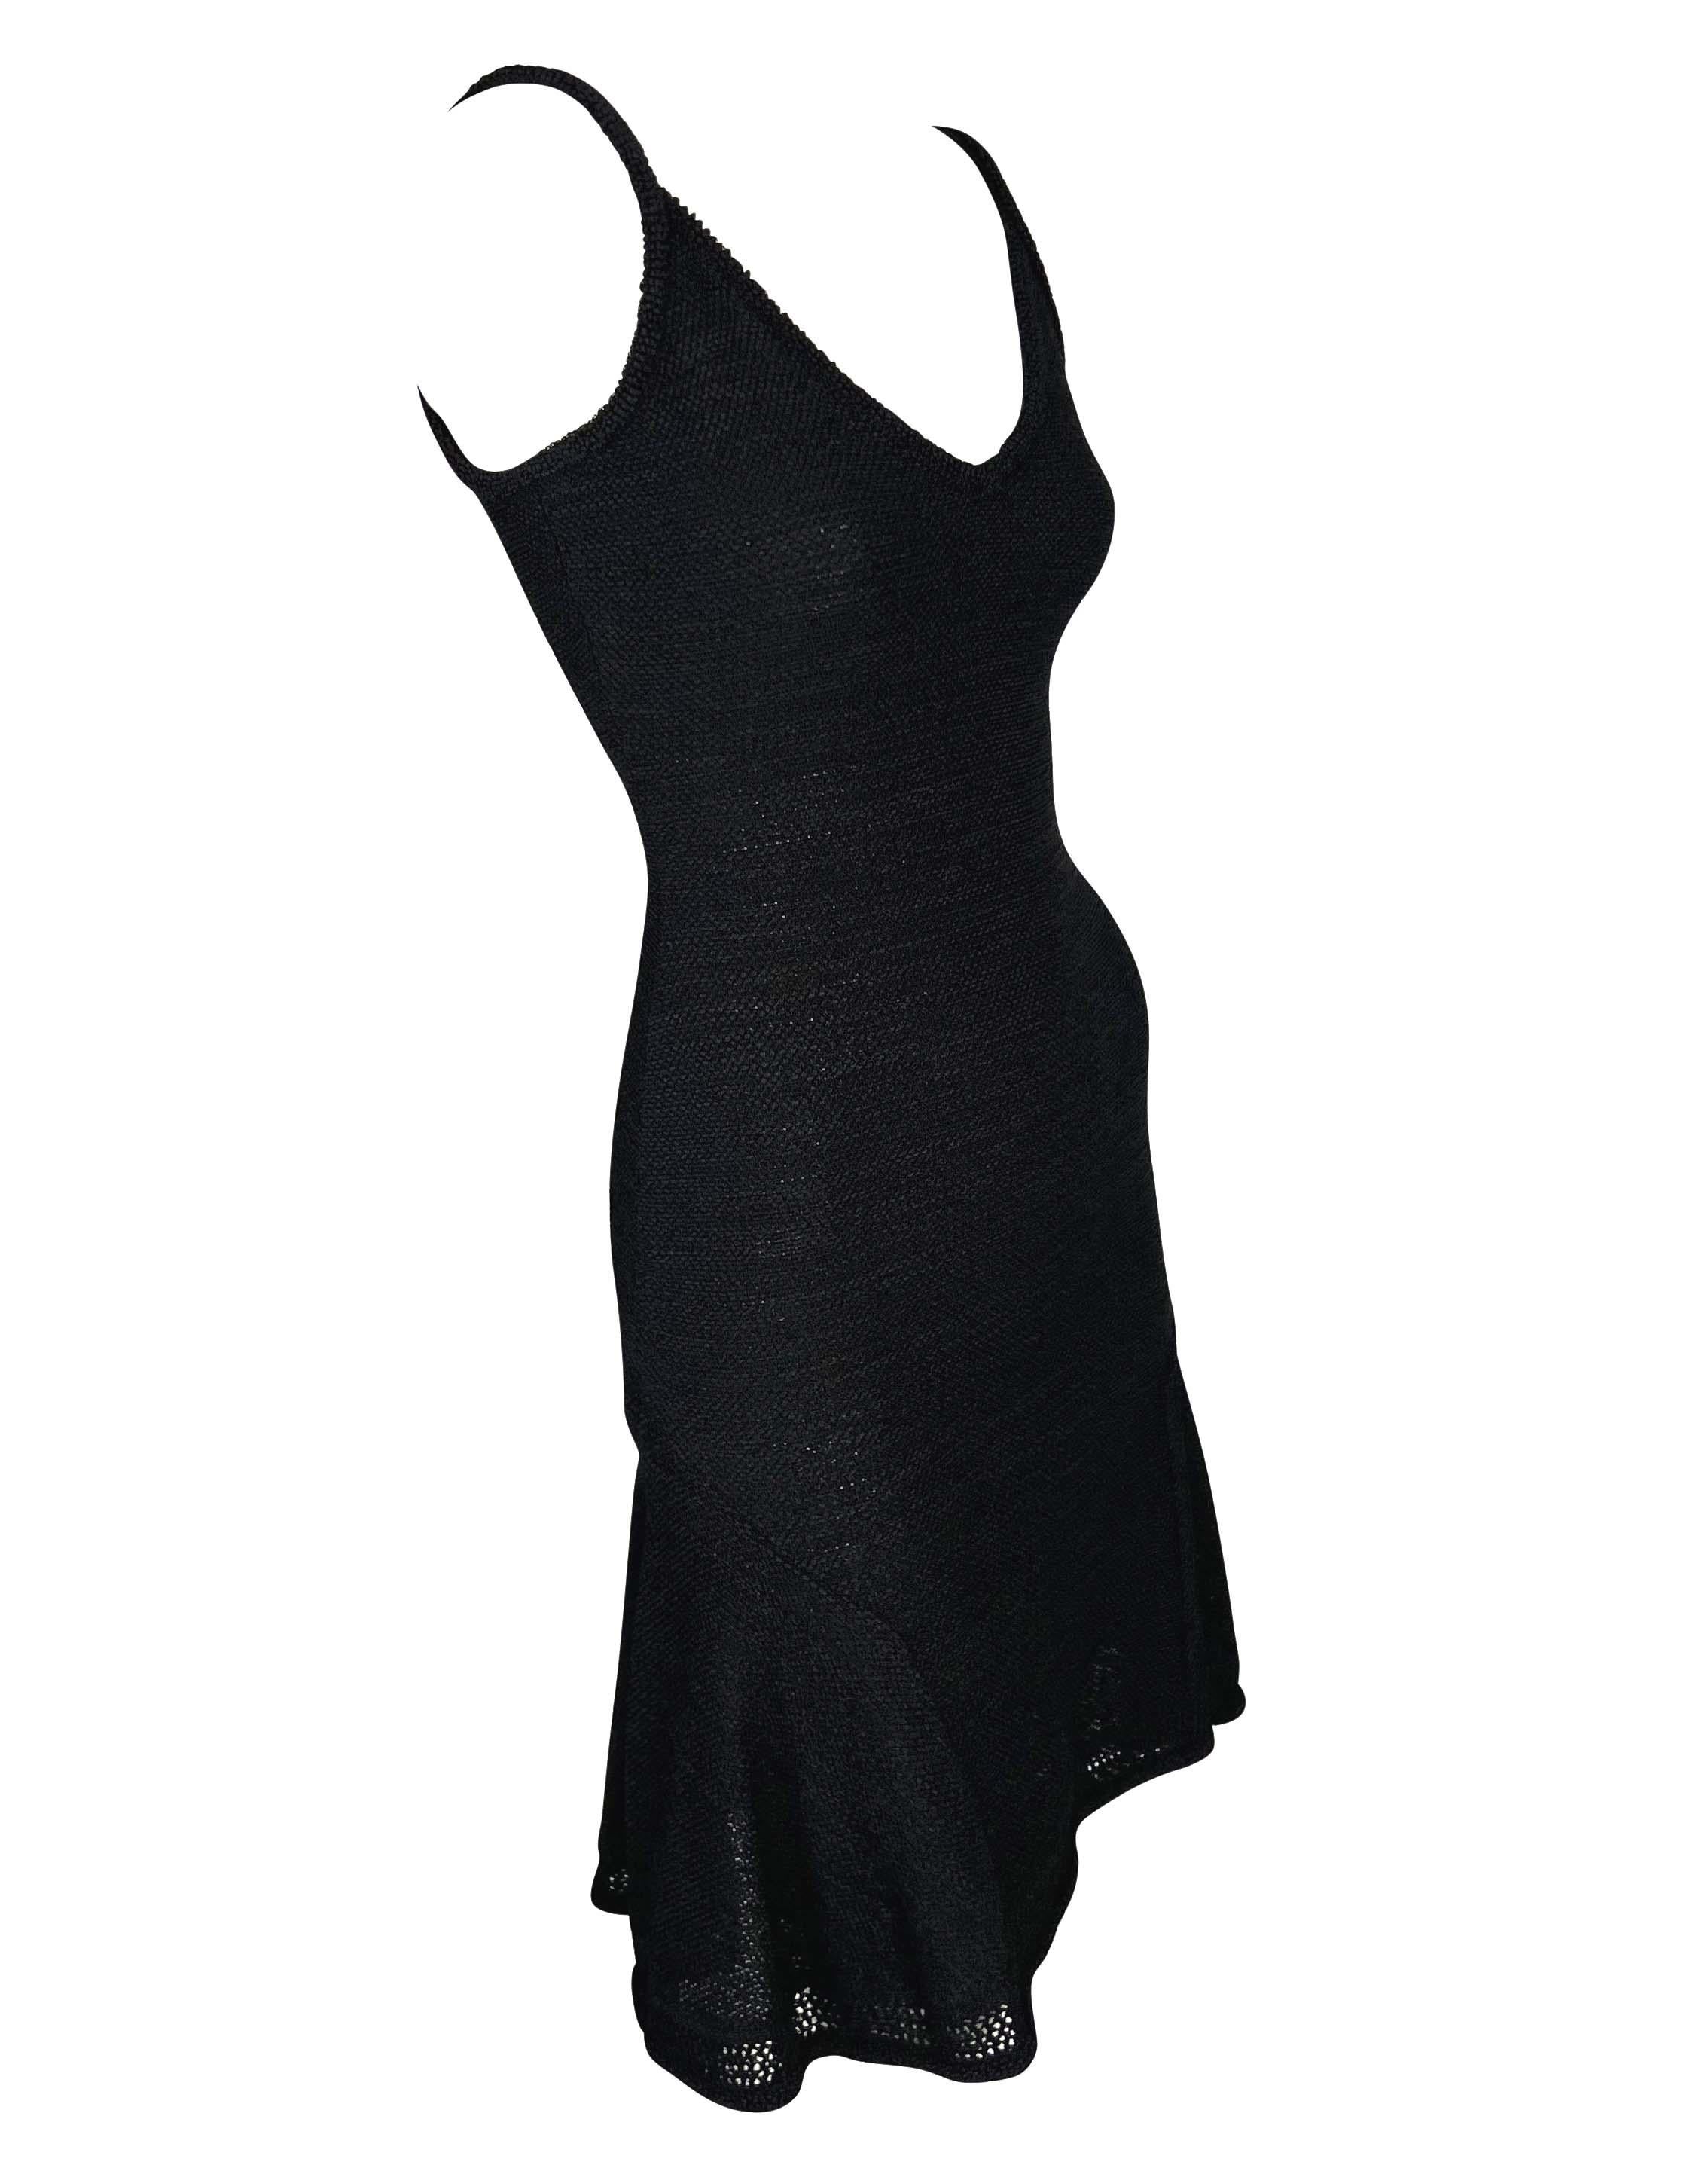 S/S 1999 John Galliano Stretch Knit Sheer Flare Black Sweater Dress For Sale 1